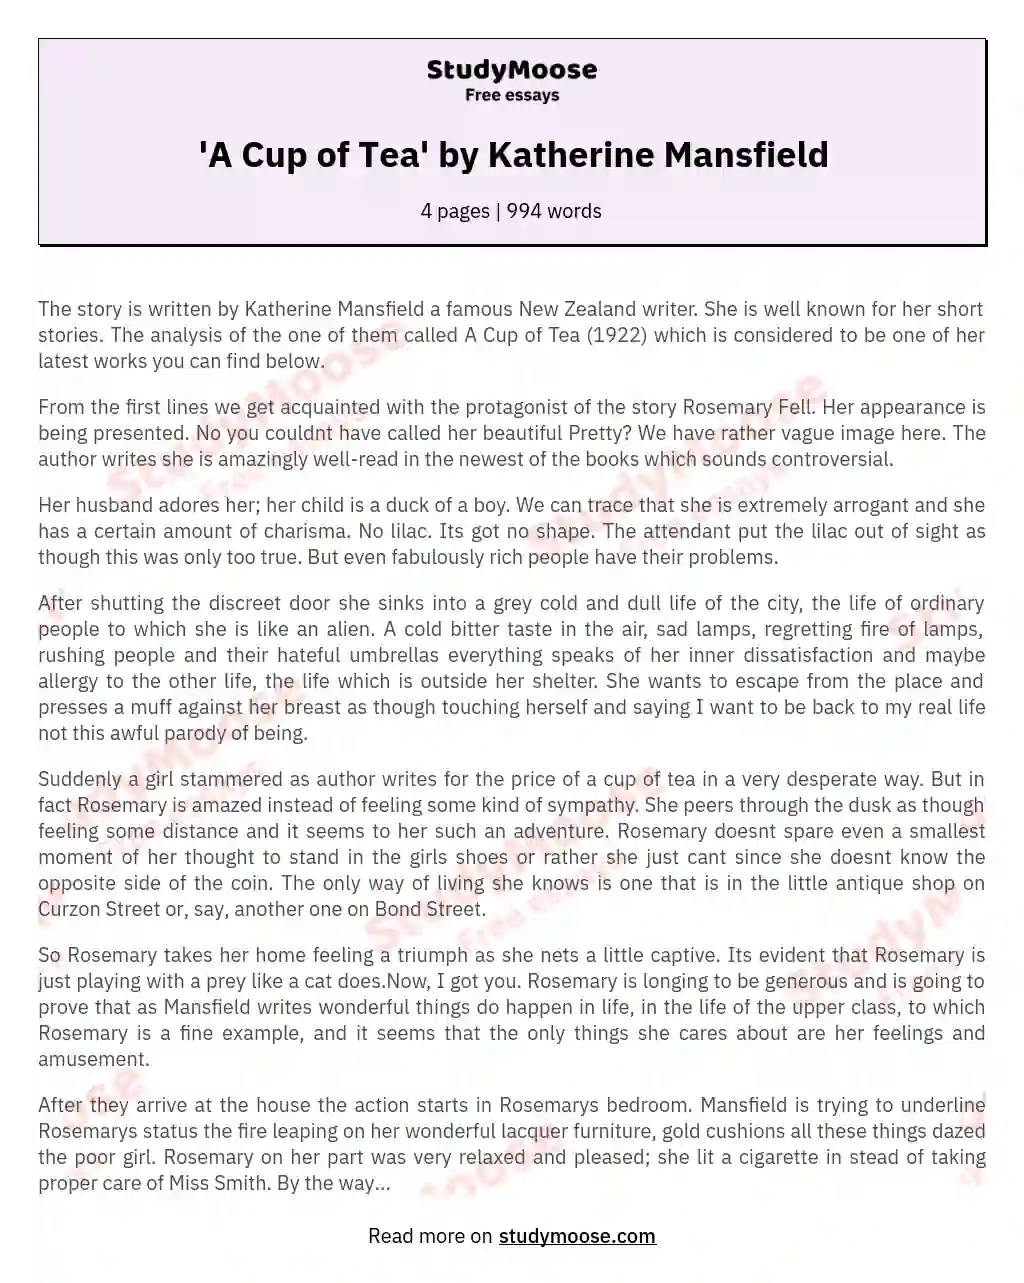 'A Cup of Tea' by Katherine Mansfield essay